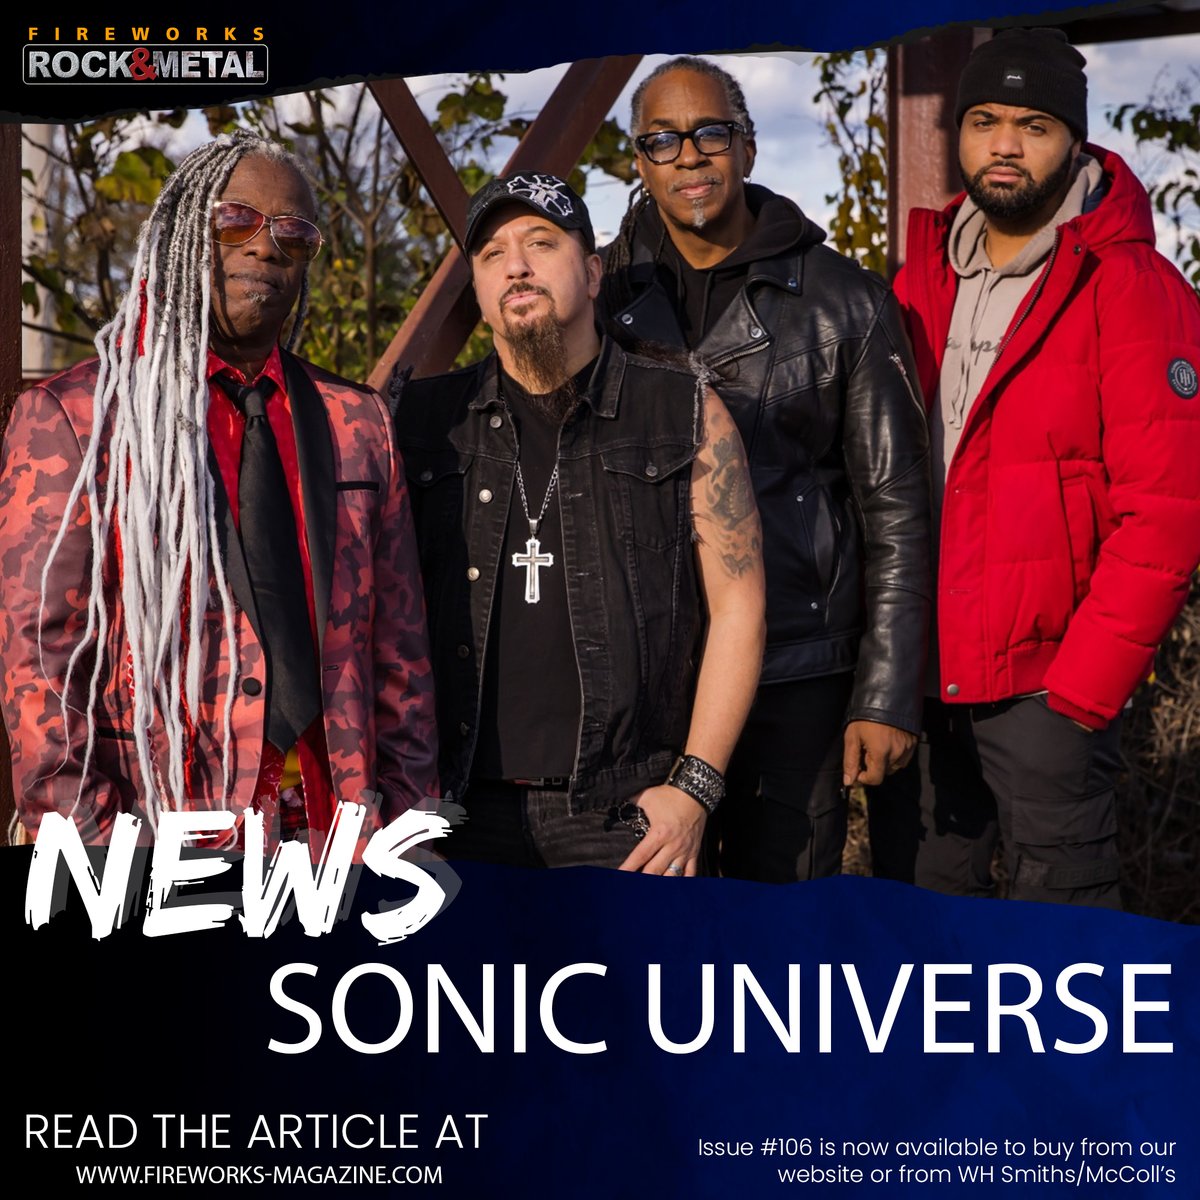 𝗘𝗫𝗖𝗘𝗟𝗟𝗘𝗡𝗧! Sonic Universe - Release New Single/Video 'It Is What It Is' 𝘙𝘦𝘢𝘥 𝘢𝘣𝘰𝘶𝘵 𝘪𝘵 𝘩𝘦𝘳𝘦: wix.to/ViGgBK4 @Duffpress -- BUY Issue #106 from fireworks-magazine.com 𝙐𝙆 𝙎𝙪𝙗𝙨𝙘𝙧𝙞𝙥𝙩𝙞𝙤𝙣𝙨 𝙣𝙤𝙬 𝙟𝙪𝙨𝙩 £32.